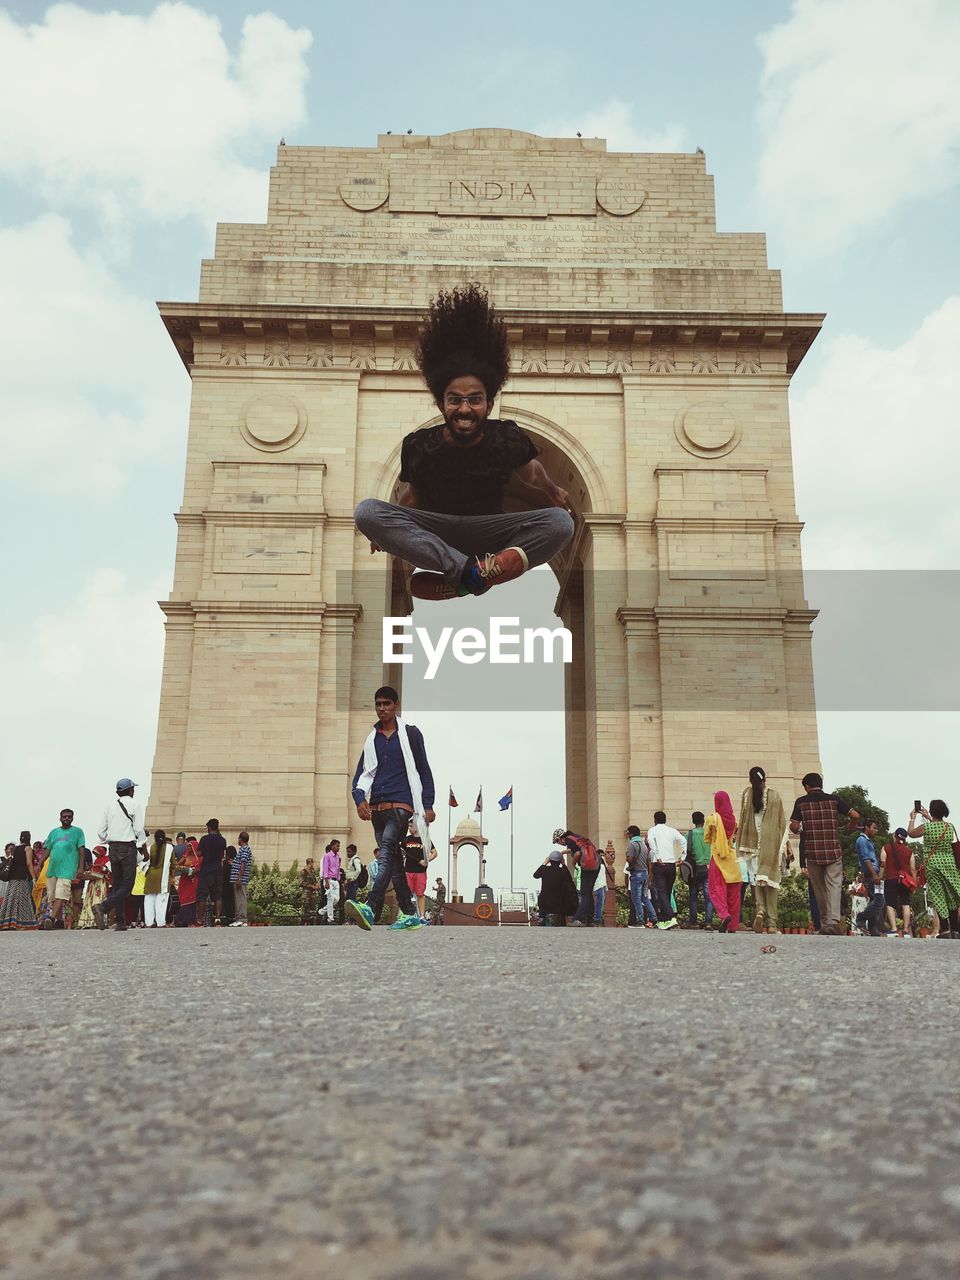 Young man jumping against india gate with people walking on street in city